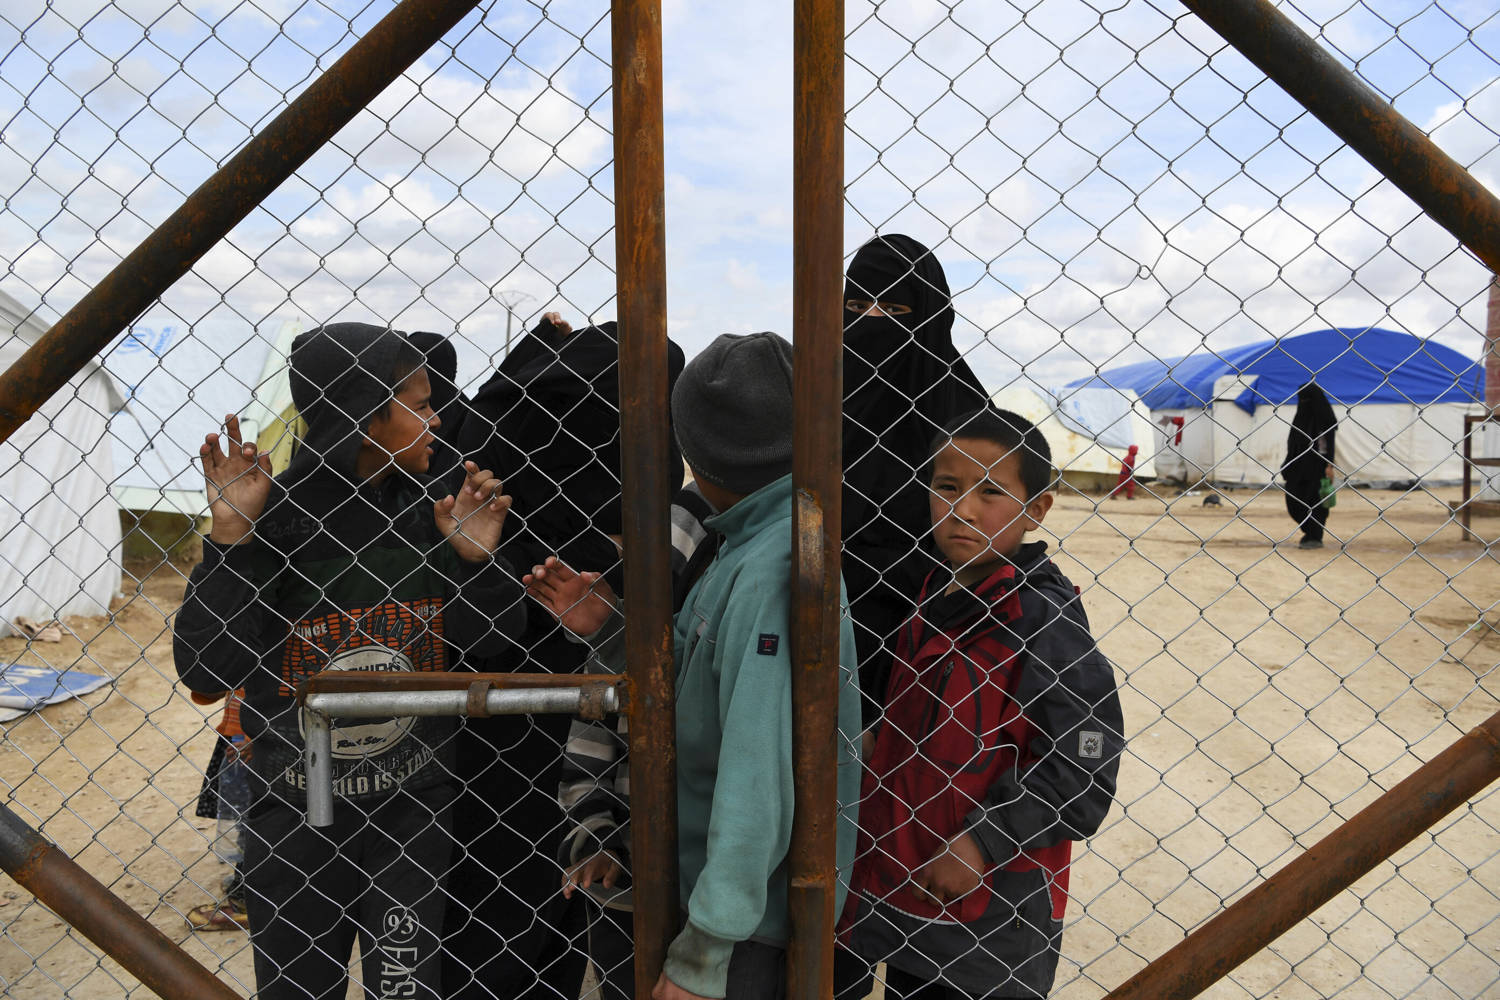 Wives and children of former ISIS fighters gather at the fence in the foreign section of the al-Hawl refugee camp in northern Syria, waiting to be taken to the camp shops, April 2, 2019. . Photo:  Kate Geraghty/Getty Images